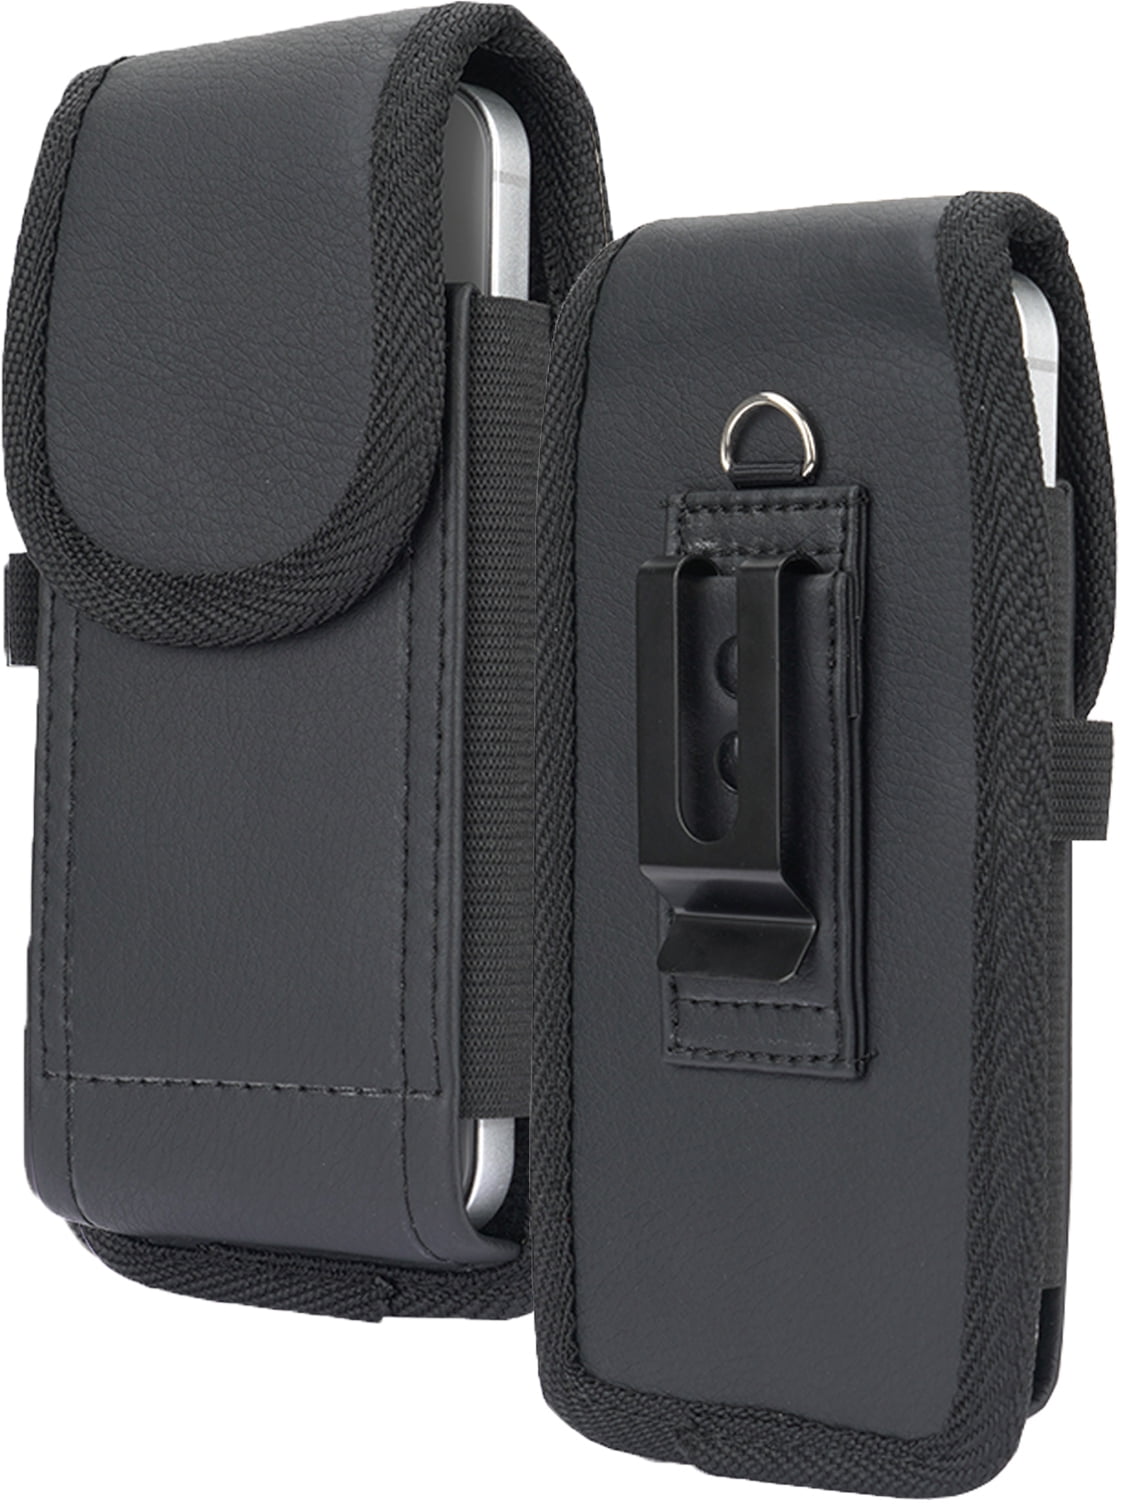 Pouch for iPhone 13 Case, Nakedcellphone Black Vegan Leather Vertical  Holster Holder Strong Metal Clip and Secure Belt Thread Loop Harness for  iPhone 13, 13 Pro, 12, 12 Pro, 11, 11 Pro, XR 